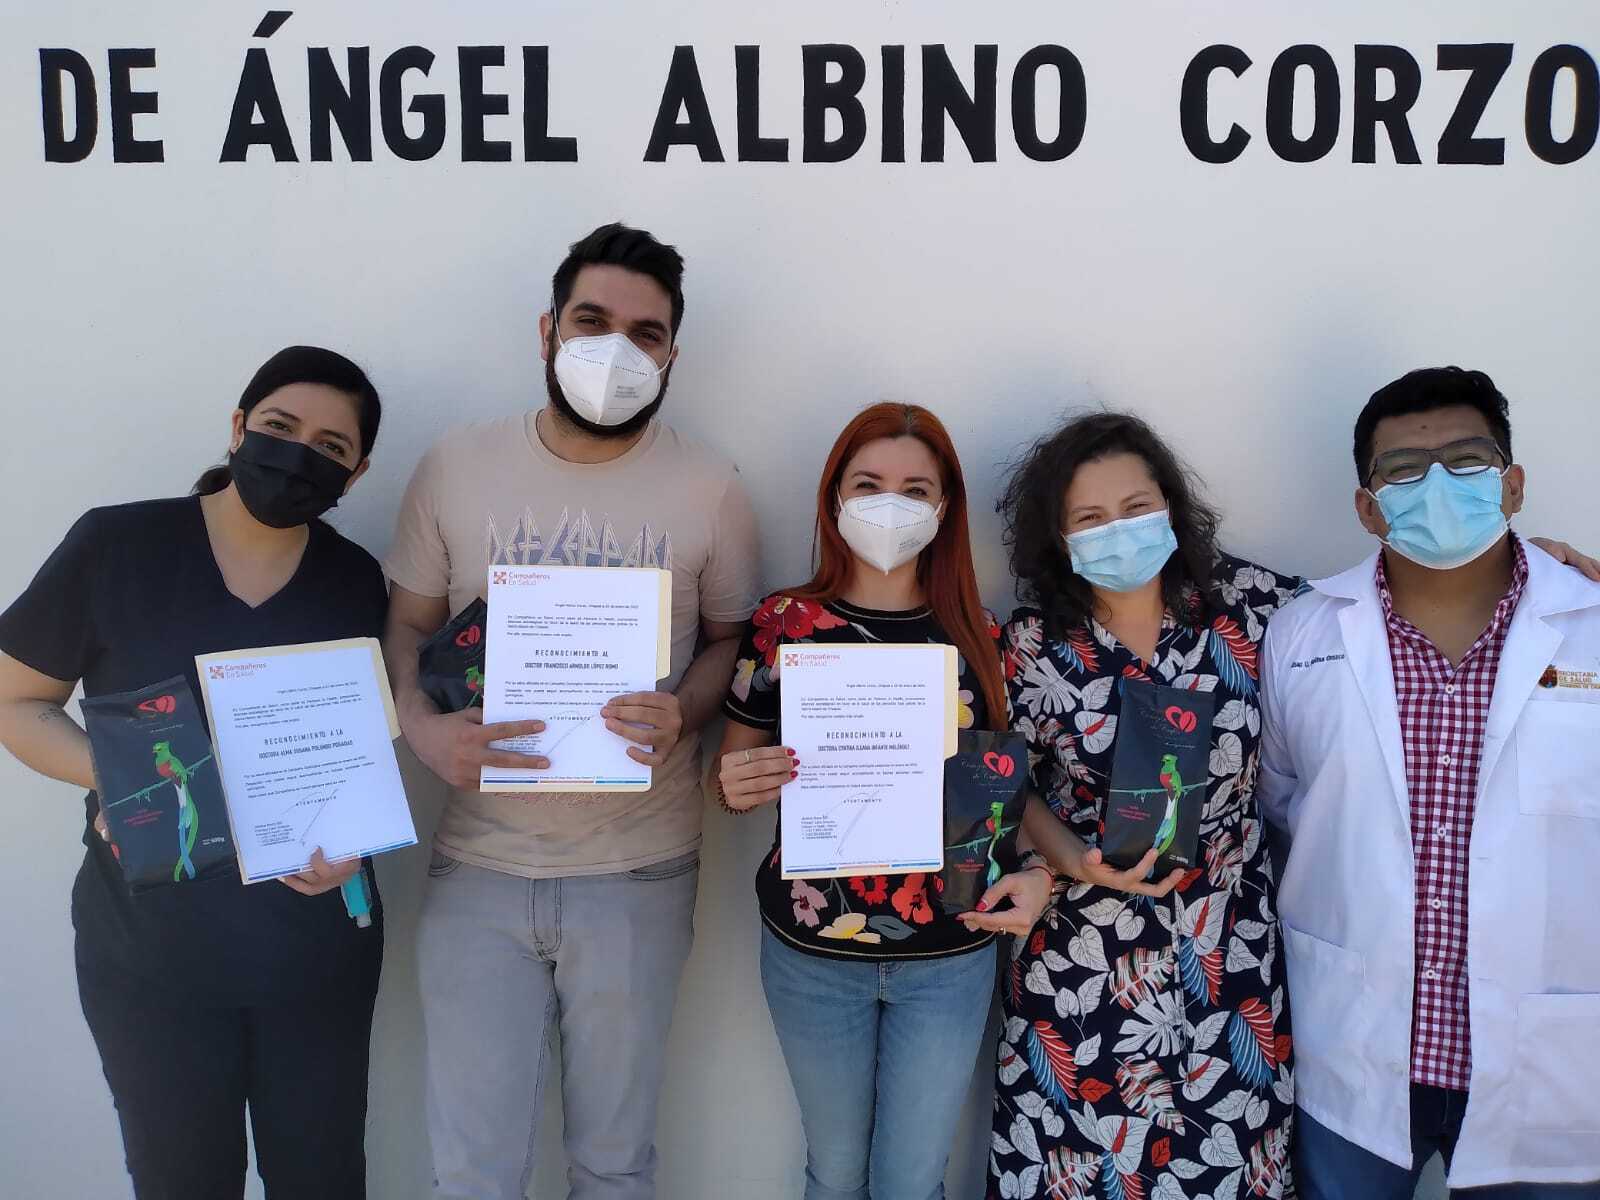 Andrea Jiménez stands with the surgery team and the director of the hospital in Jaltenango. From left to right: Susana Polendo, Francisco López, Cynthia Infante, Andrea Jiménez, and César Molina, director of the Ángel Albino Corzo Basic Community Hospital in Jaltenango, Chiapas. Photo courtesy of Compañeros En Salud.